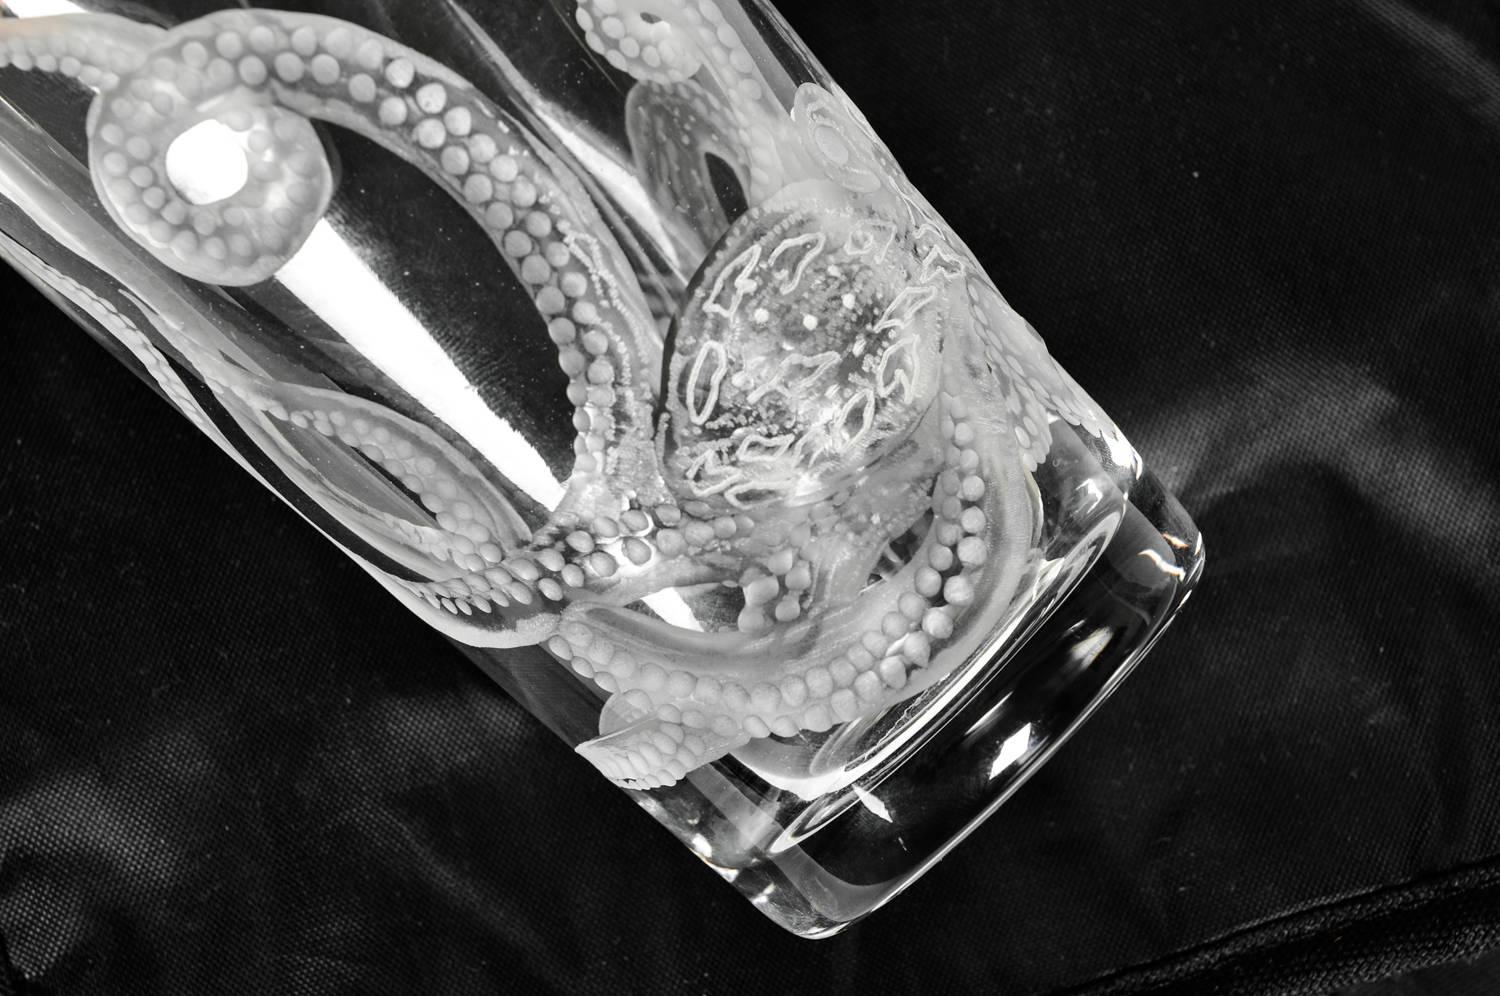 Vintage Silver Plate Cover with Cut-Glass Shaker 1